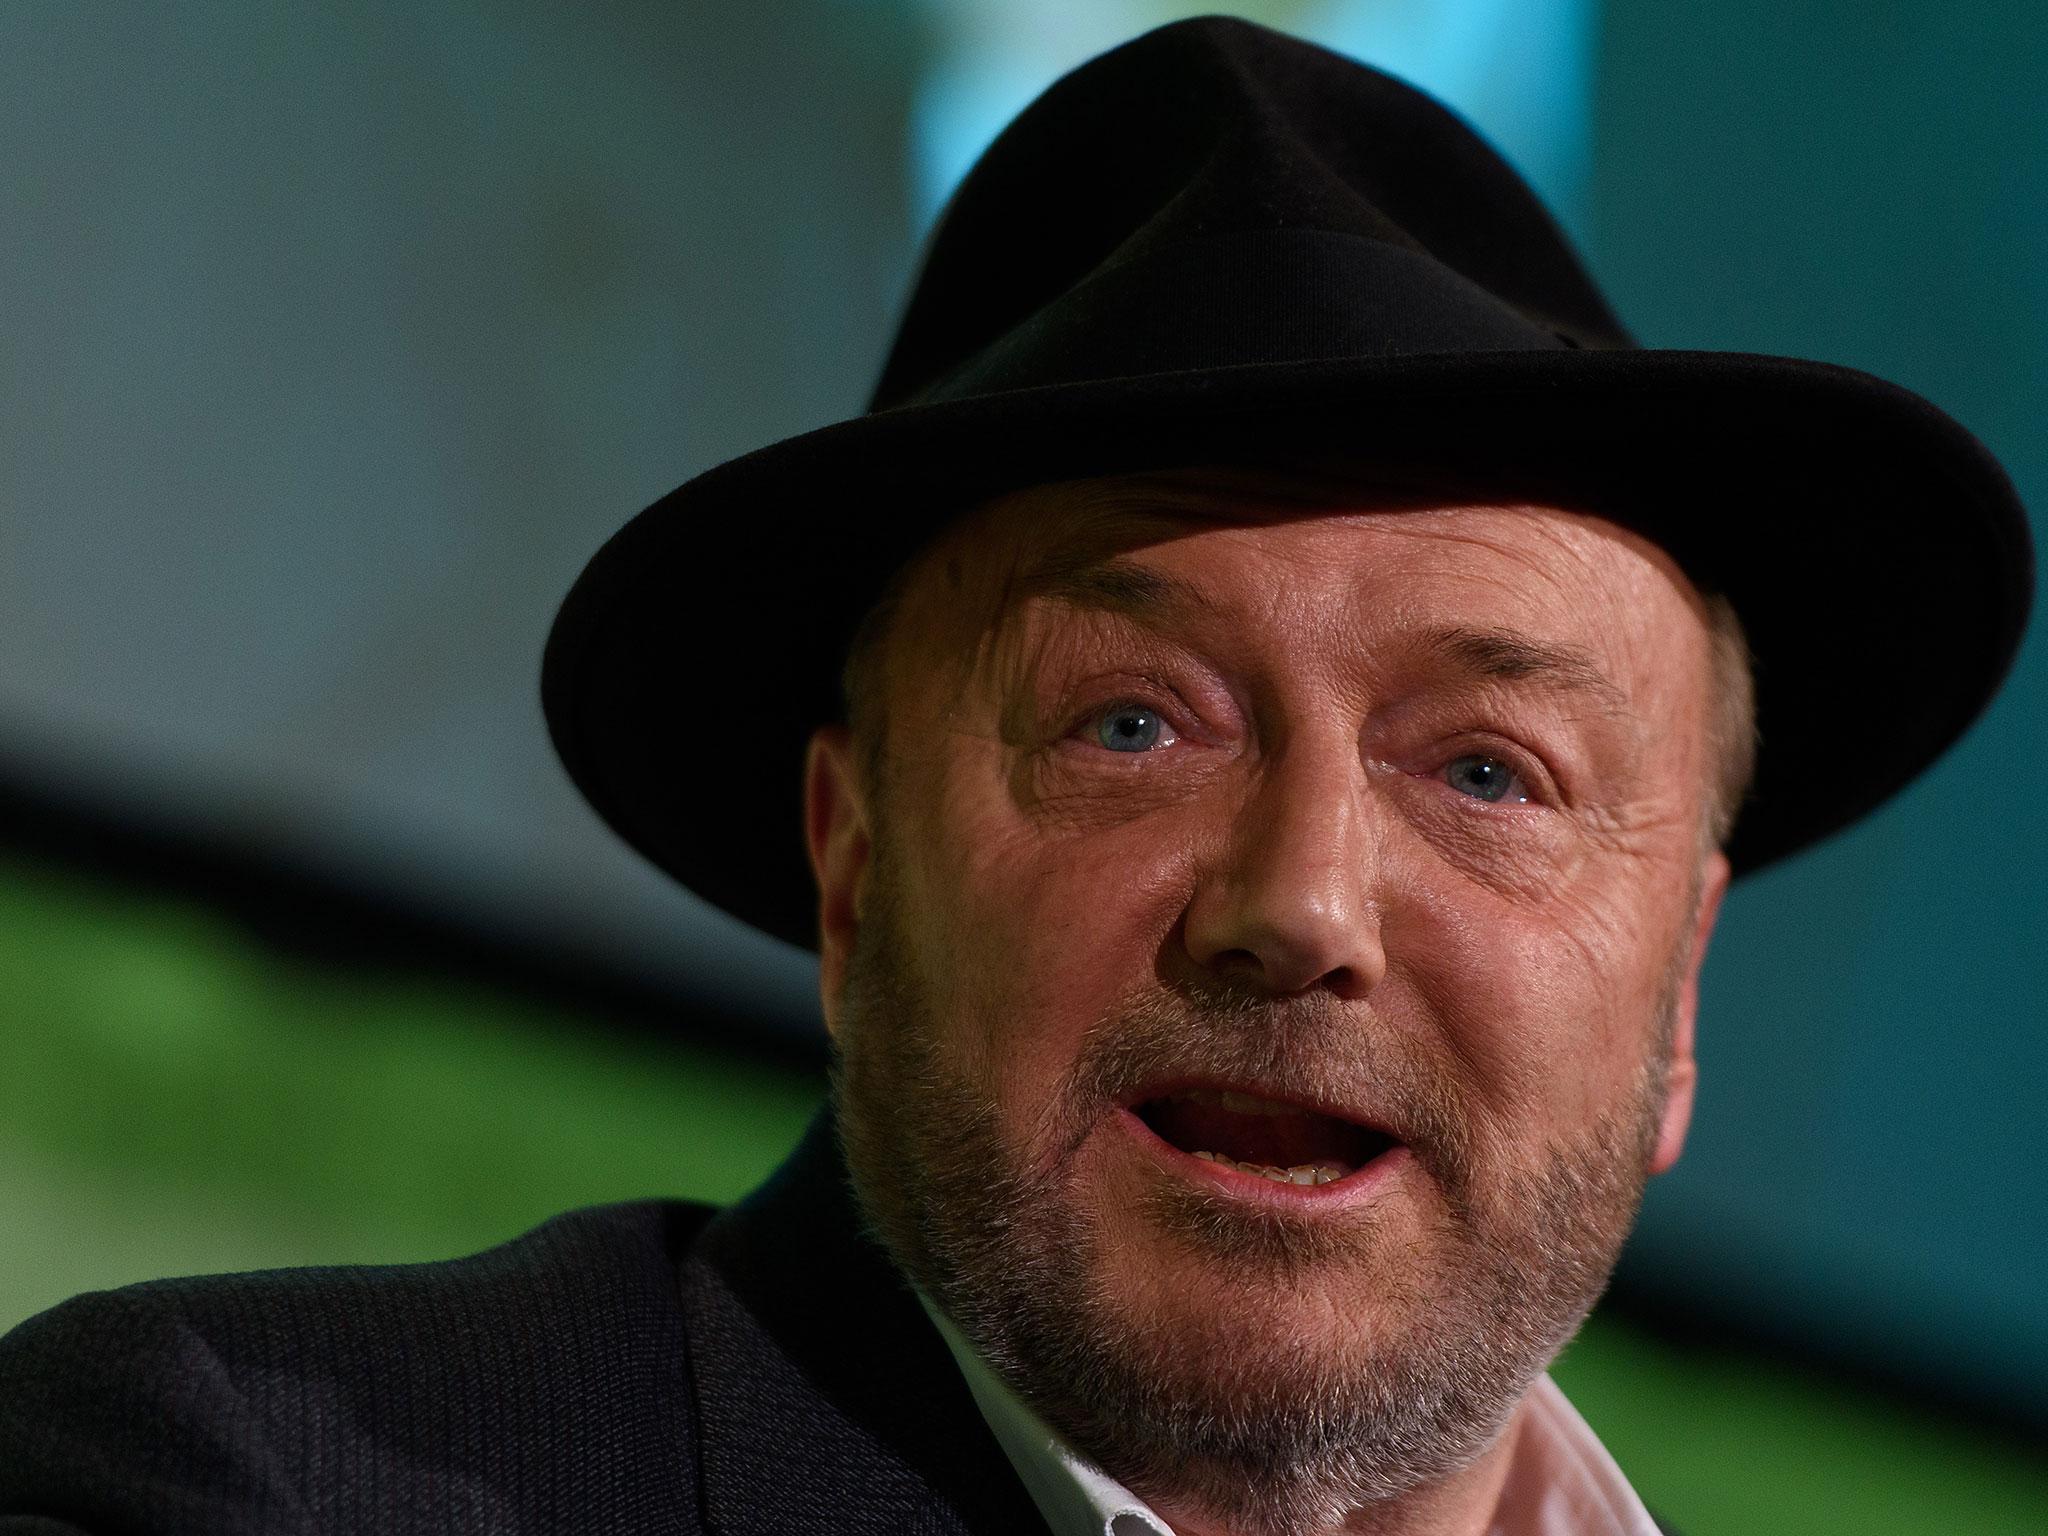 George Galloway withdrew his allegations against his former aide and agreed to pay undisclosed damages